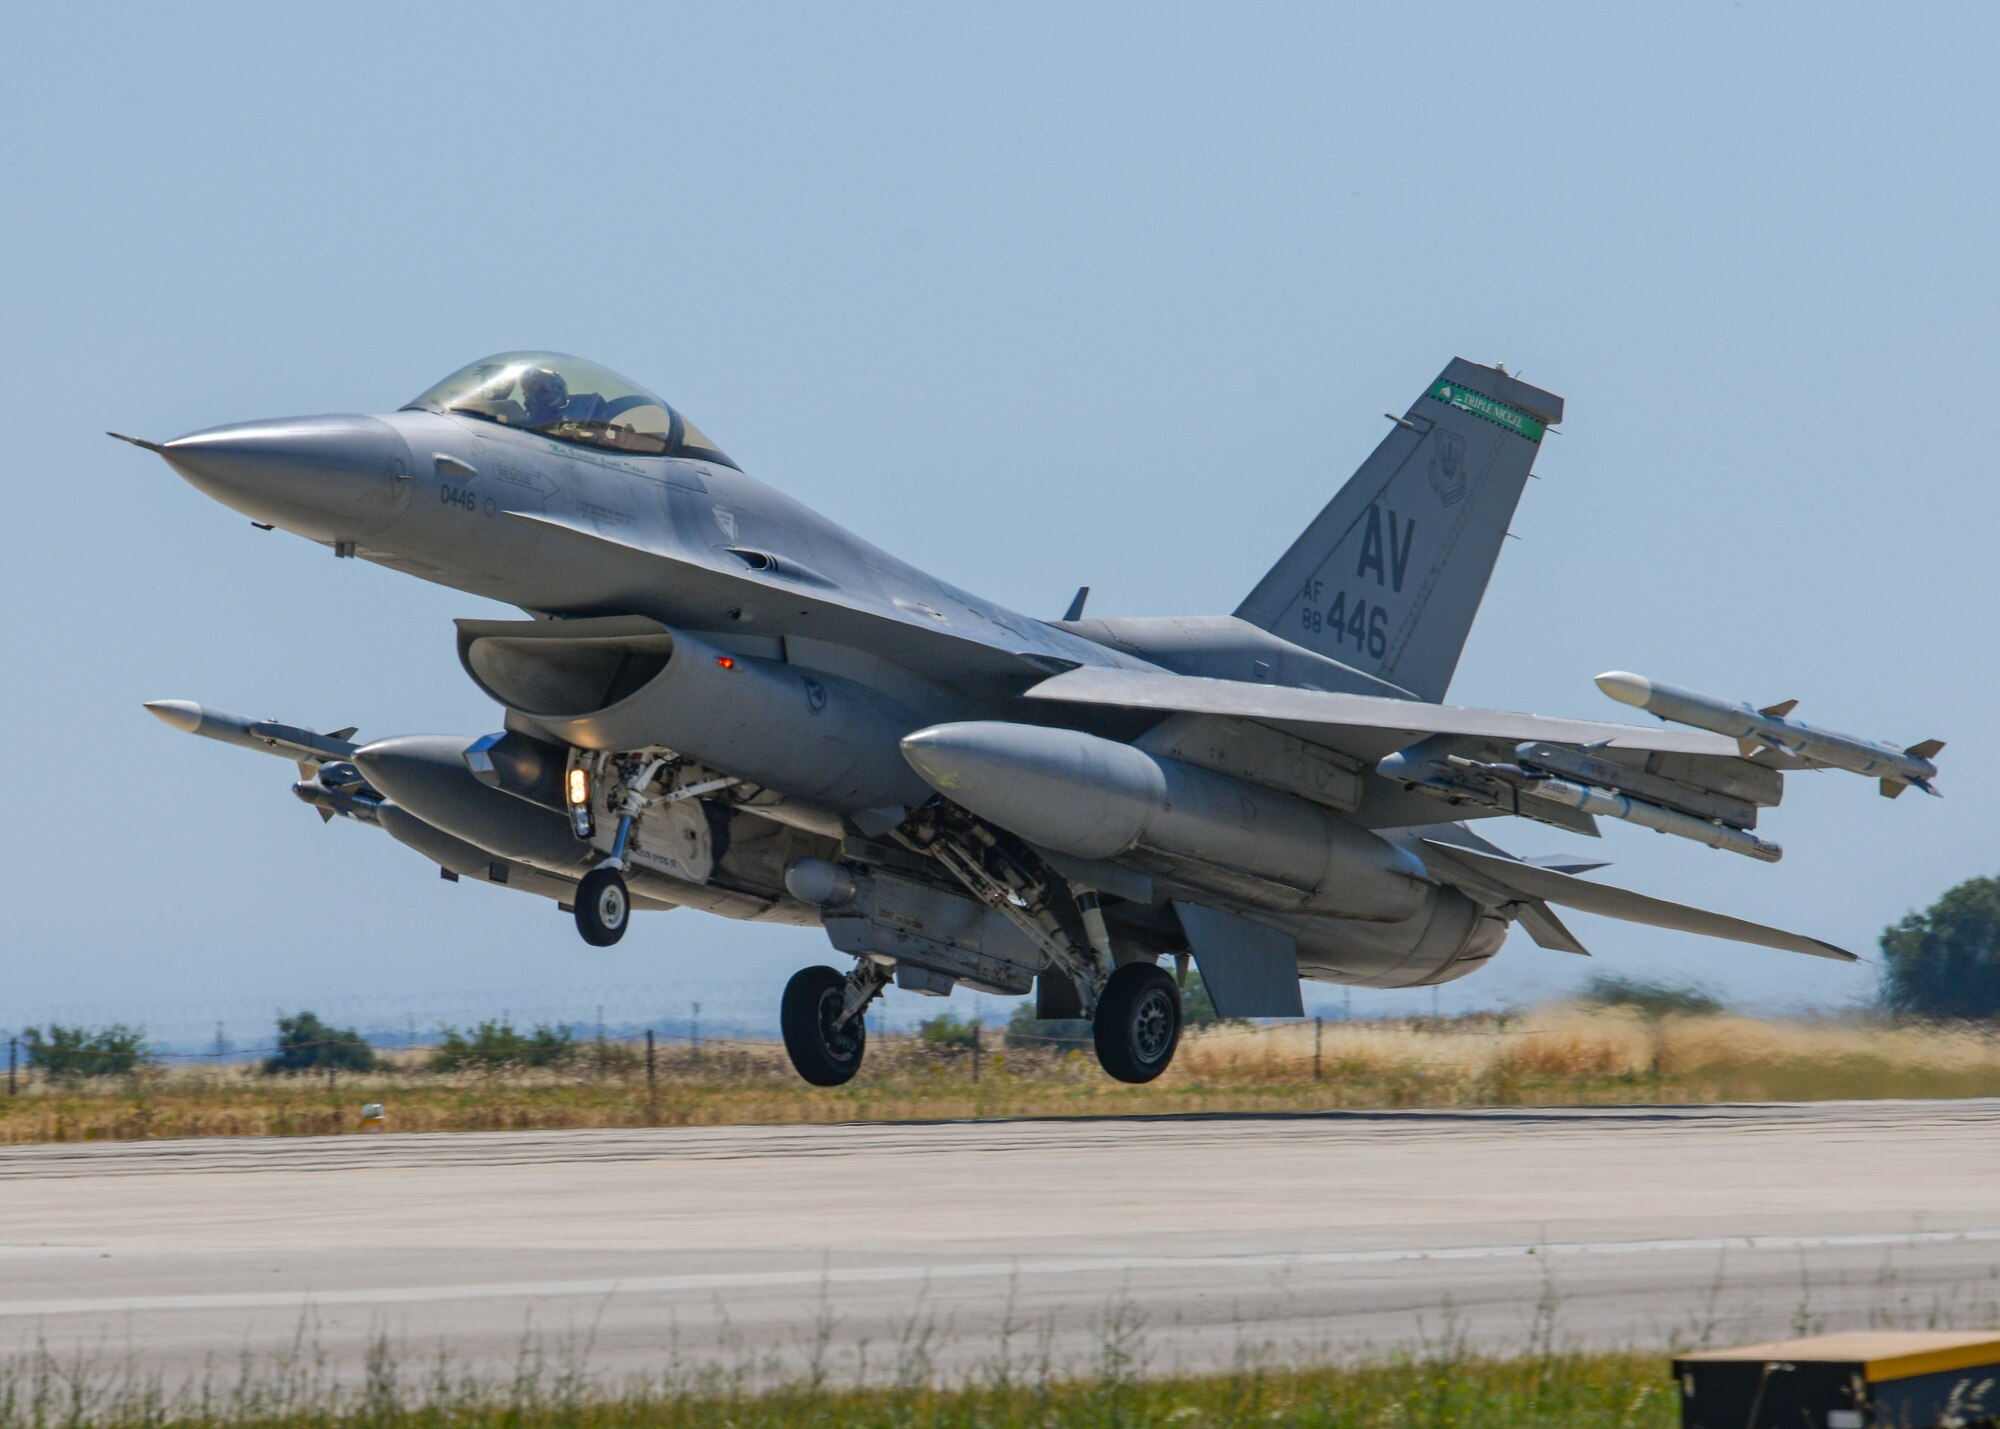 A U.S. Air Force F-16C Fighting Falcon assigned to the 555th Fighter Squadron participating in Falcon Strike 21 (FS21) lands at Amendola Air Base, Italy, June 4, 2021. FS21 is an exercise designed to provide advanced and realistic aircrew training through fourth and fifth generation integration. Exercises like FS21 provide a venue to train with other nations, build readiness, practice interoperability, and enhance enduring relationships. (U.S. Air Force photo by Airman 1st Class Brooke Moeder)